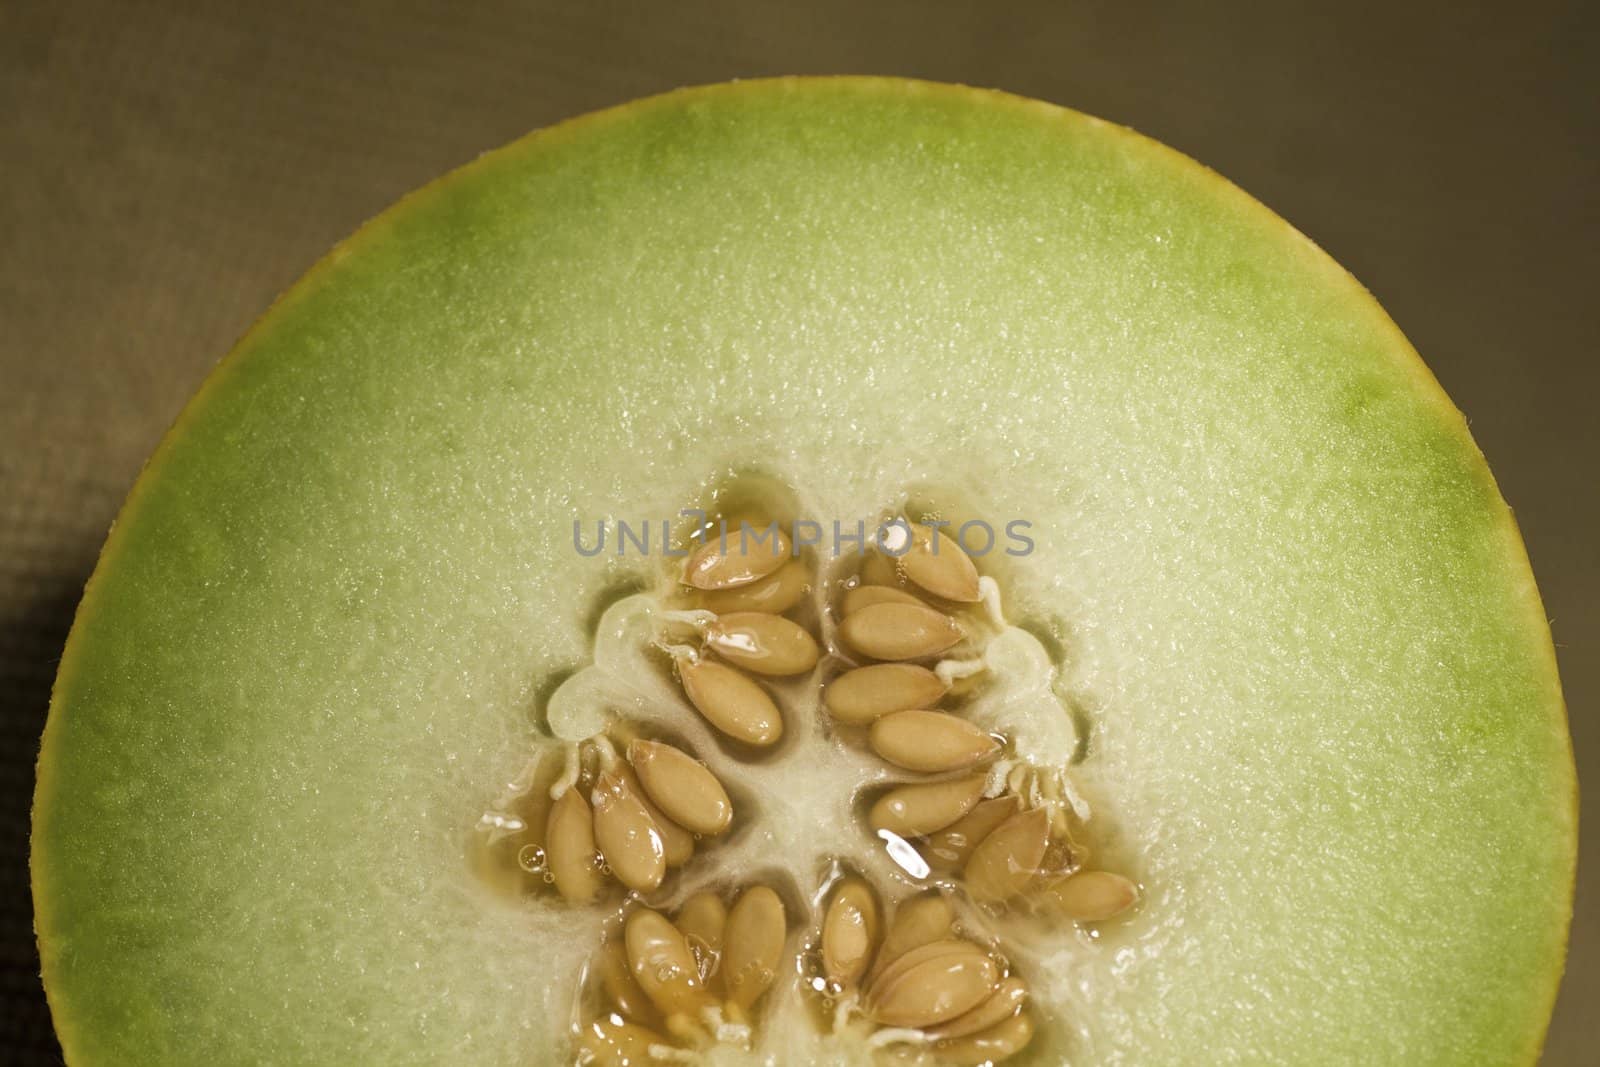 Closeup view of a sliced in half yellow melon.